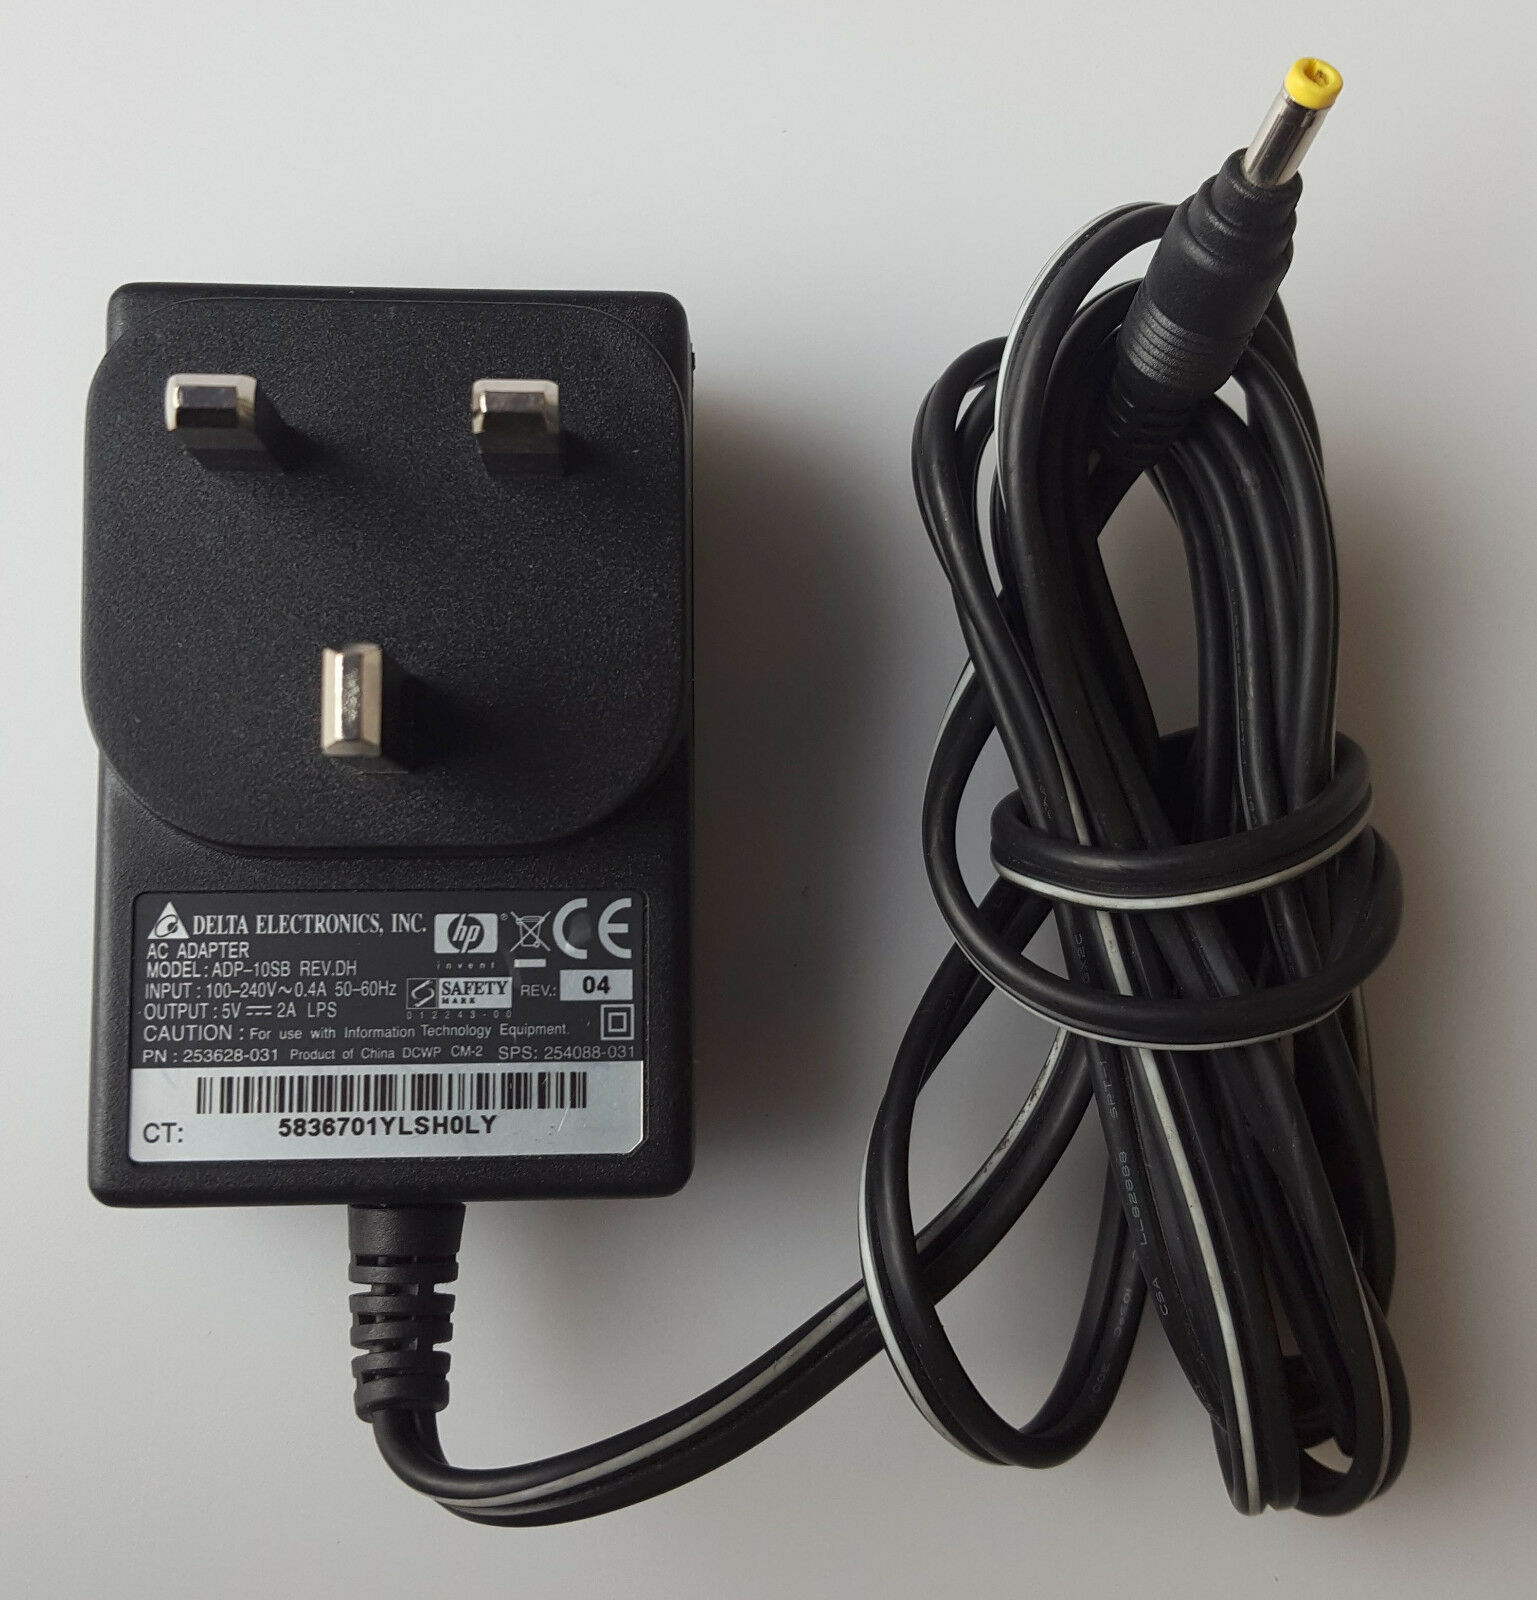 New 5V 2A DELTA ELECTRONICS ADP-10SB REV.DH Power Supply Ac Adapter